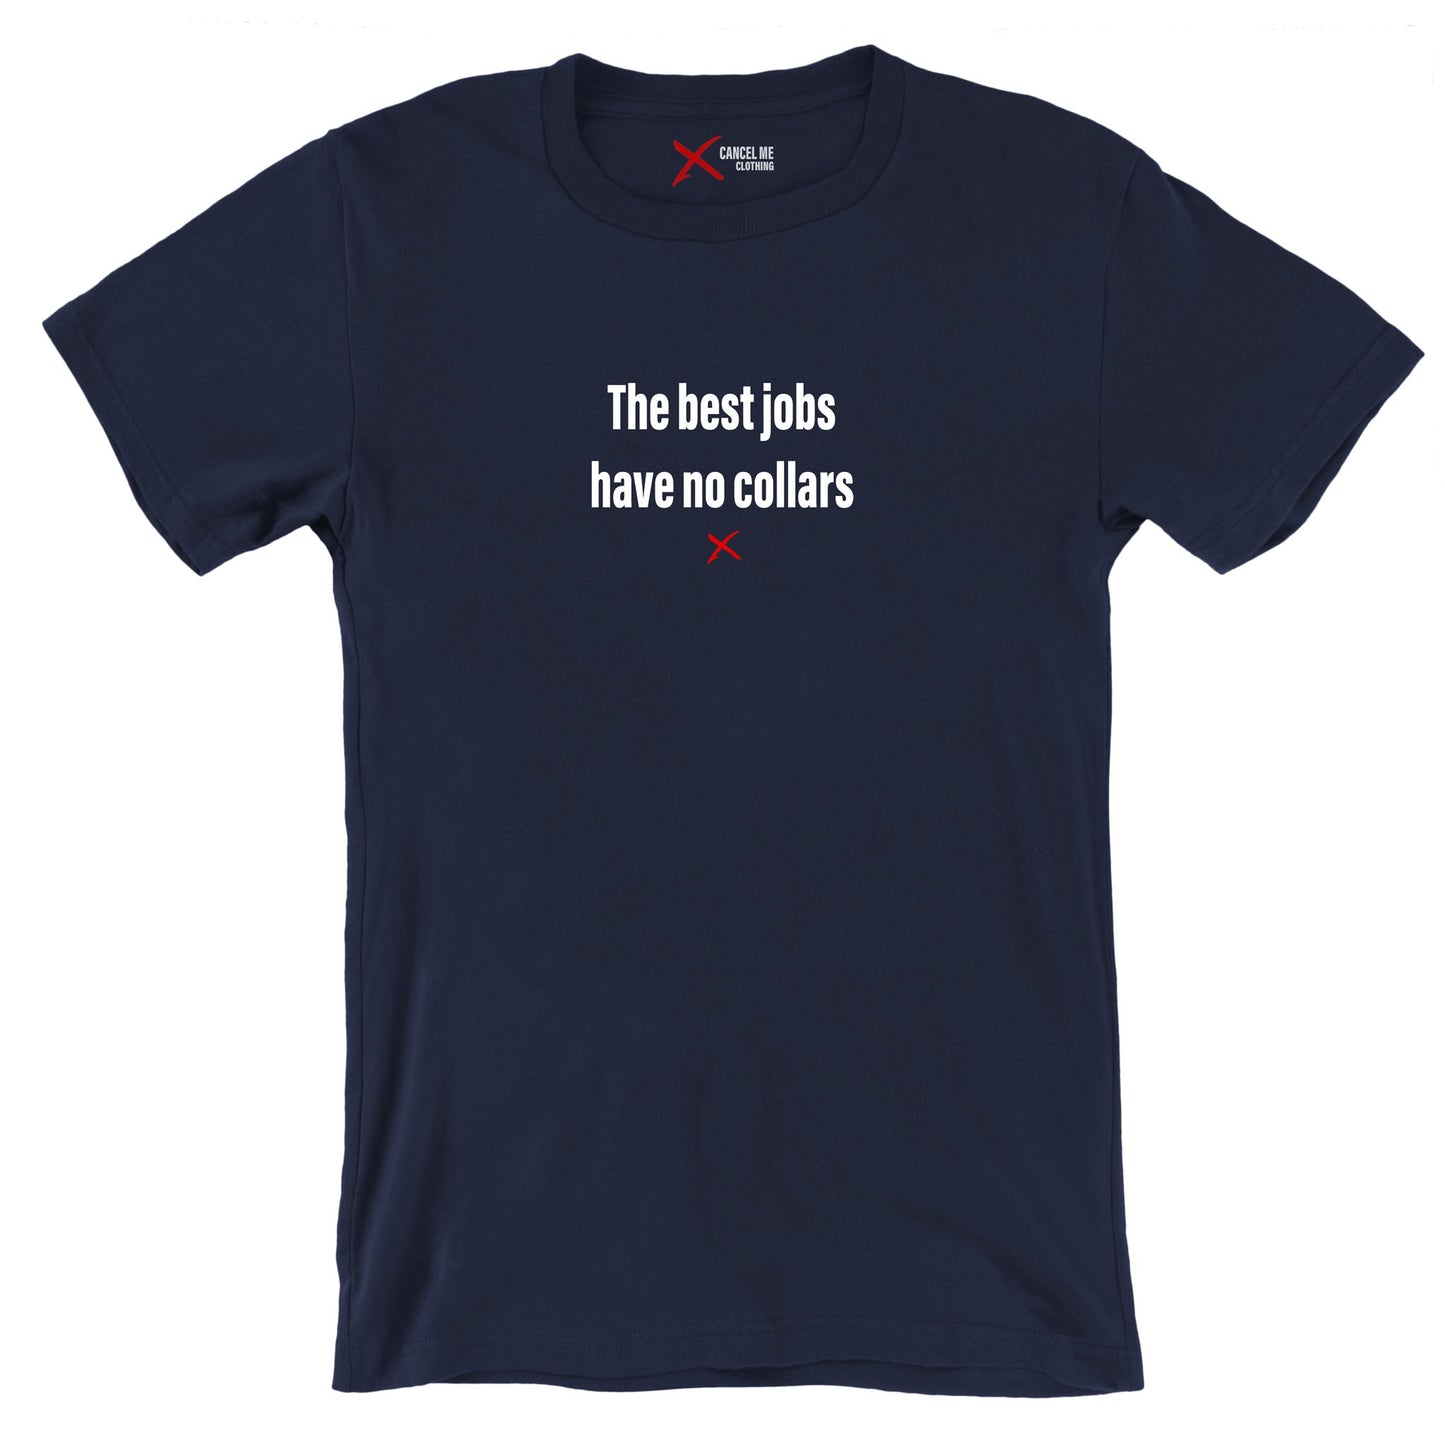 The best jobs have no collars - Shirt